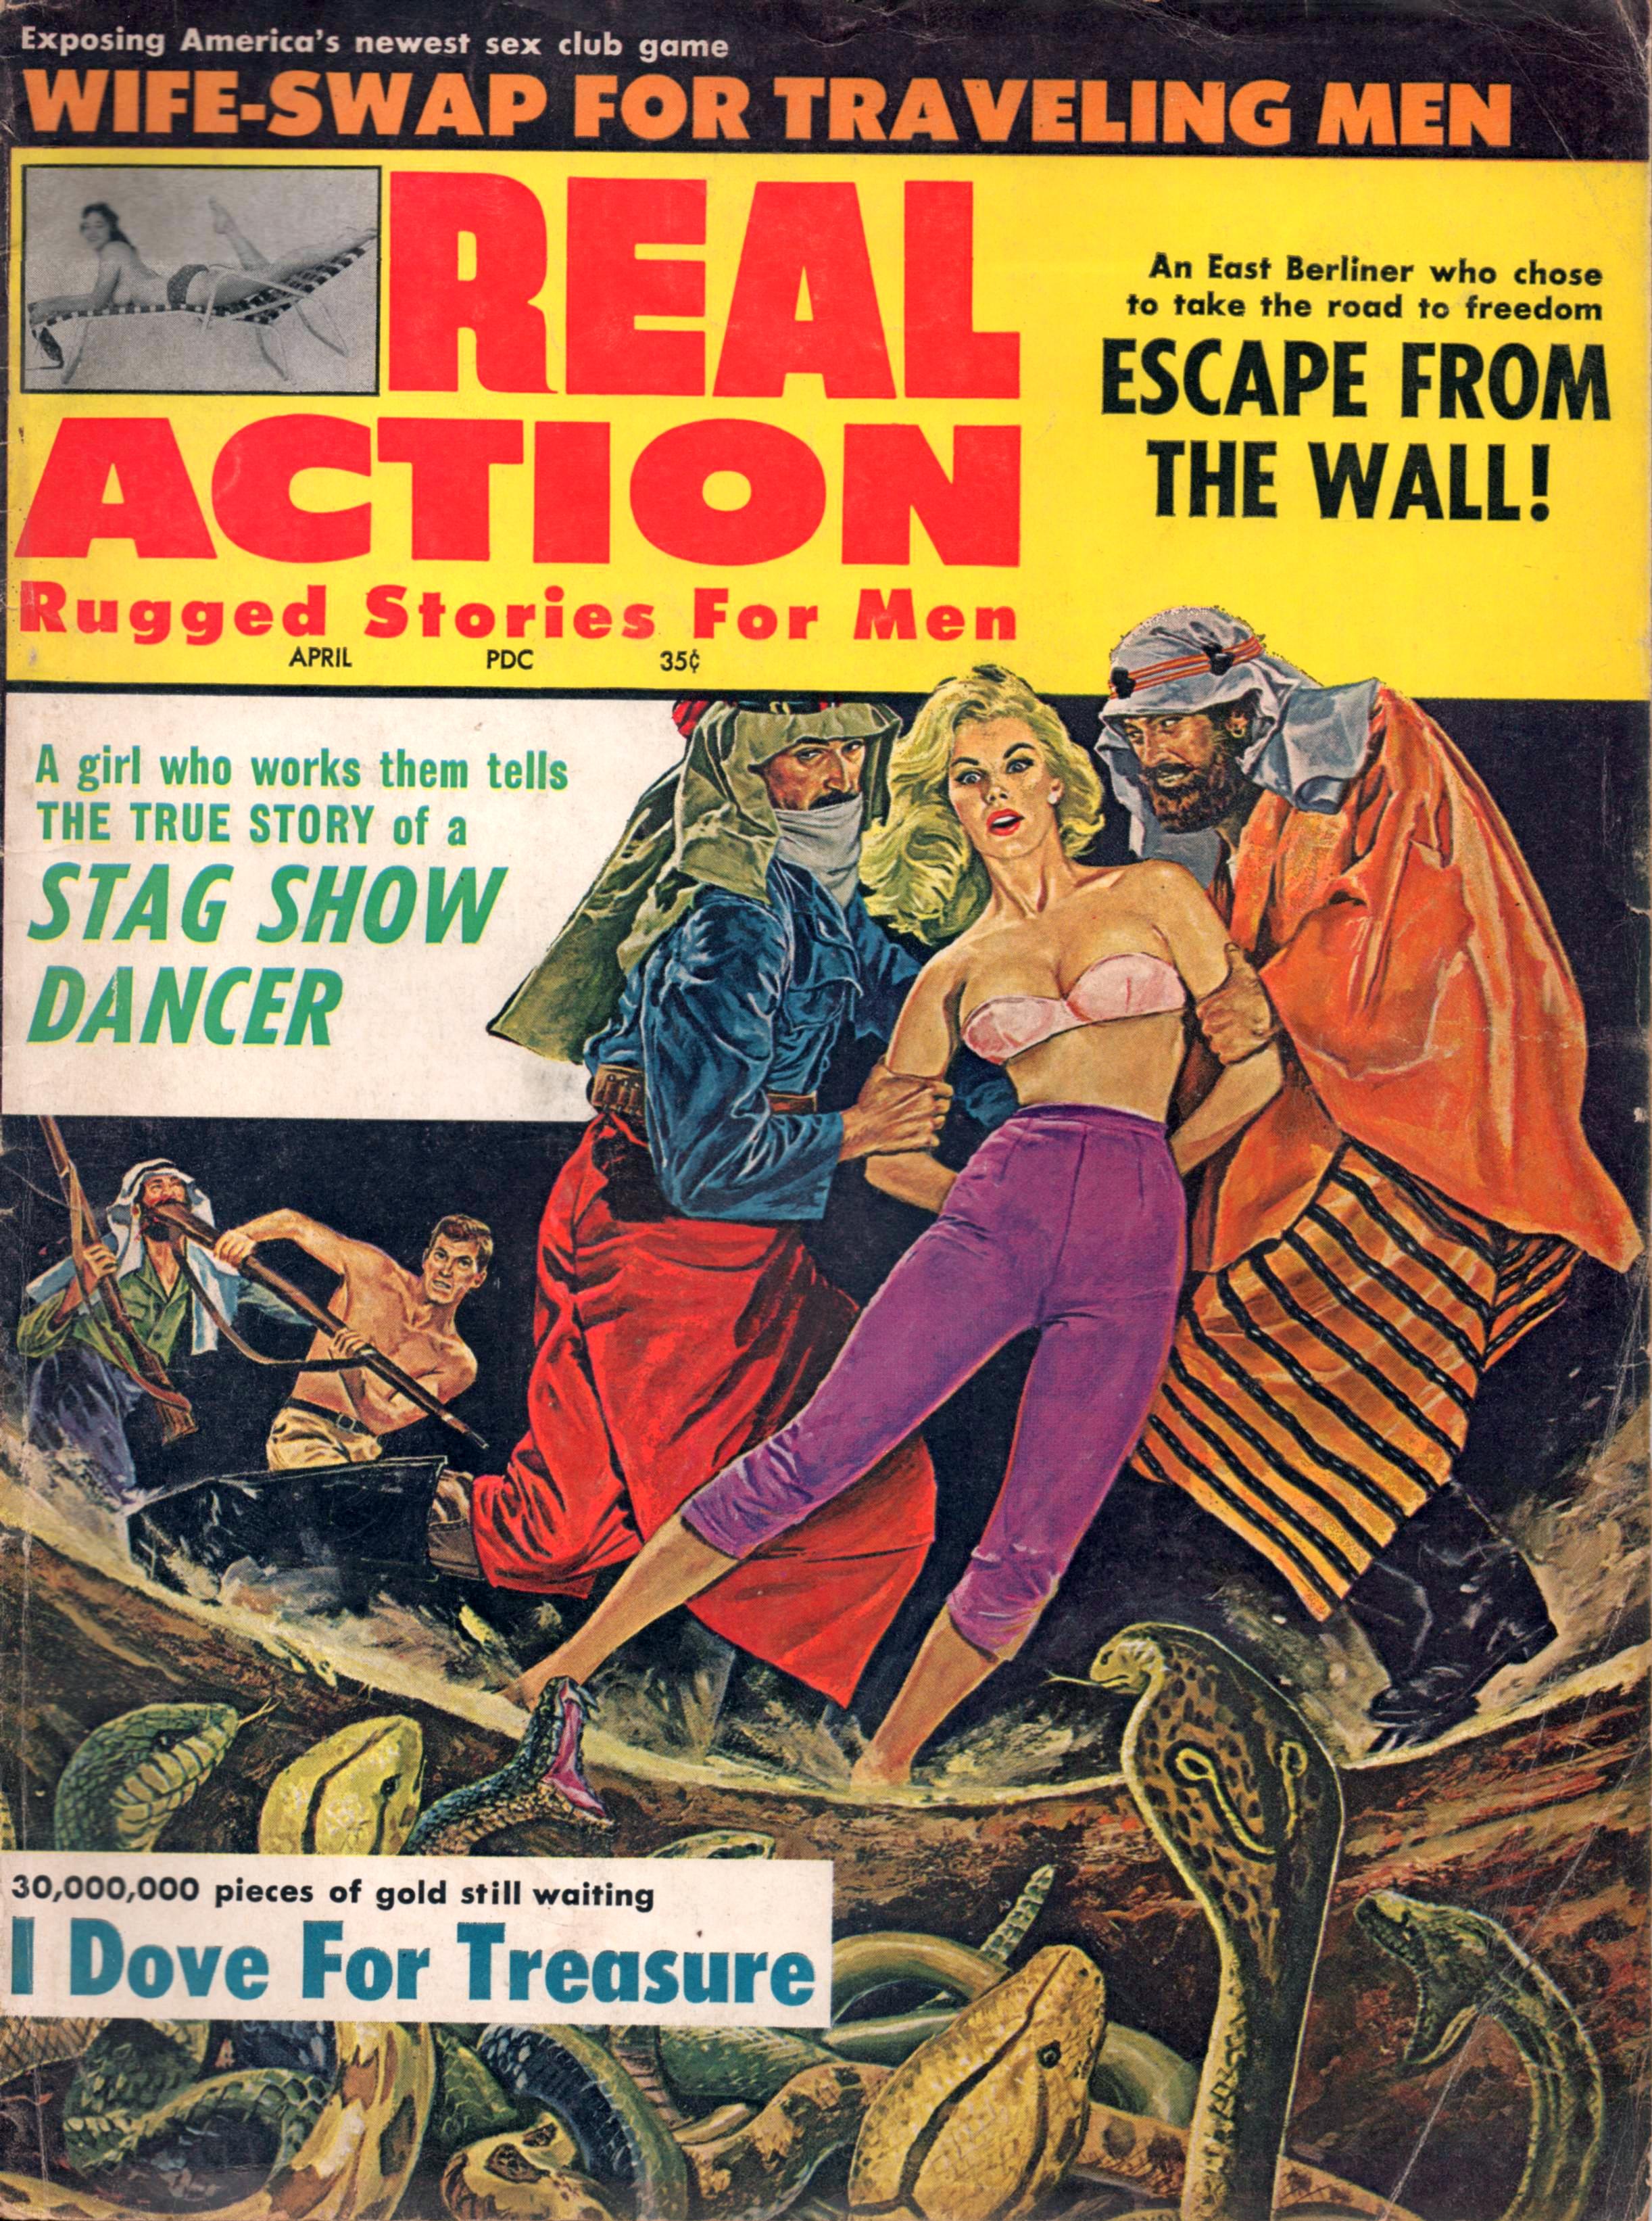 Are American Men Sex Failures / Wife-Swap For Traveling Men -- Pulp Covers